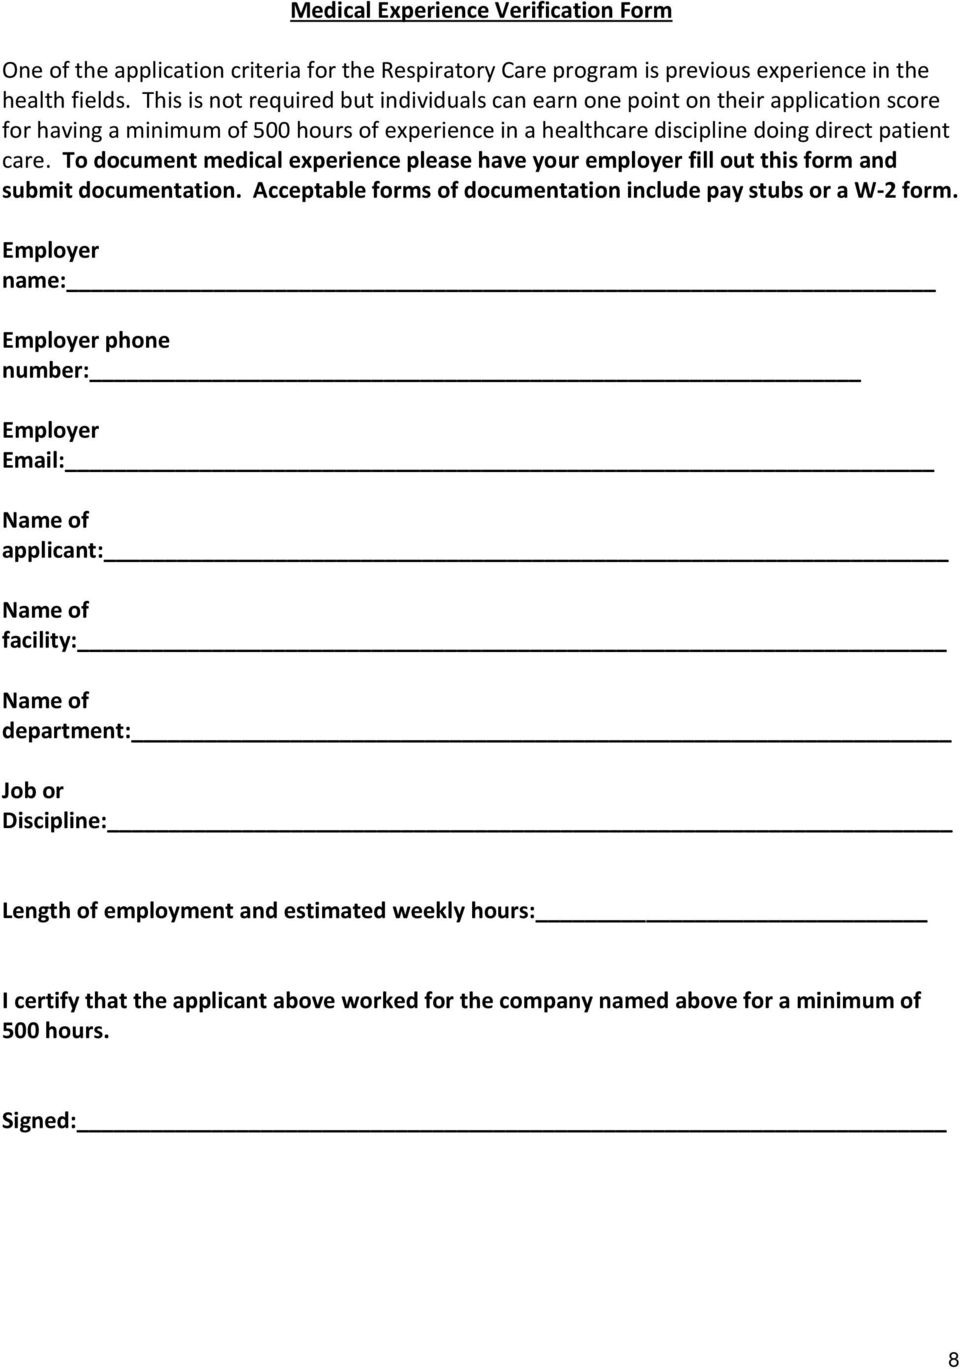 To document medical experience please have your employer fill out this form and submit documentation. Acceptable forms of documentation include pay stubs or a W-2 form.